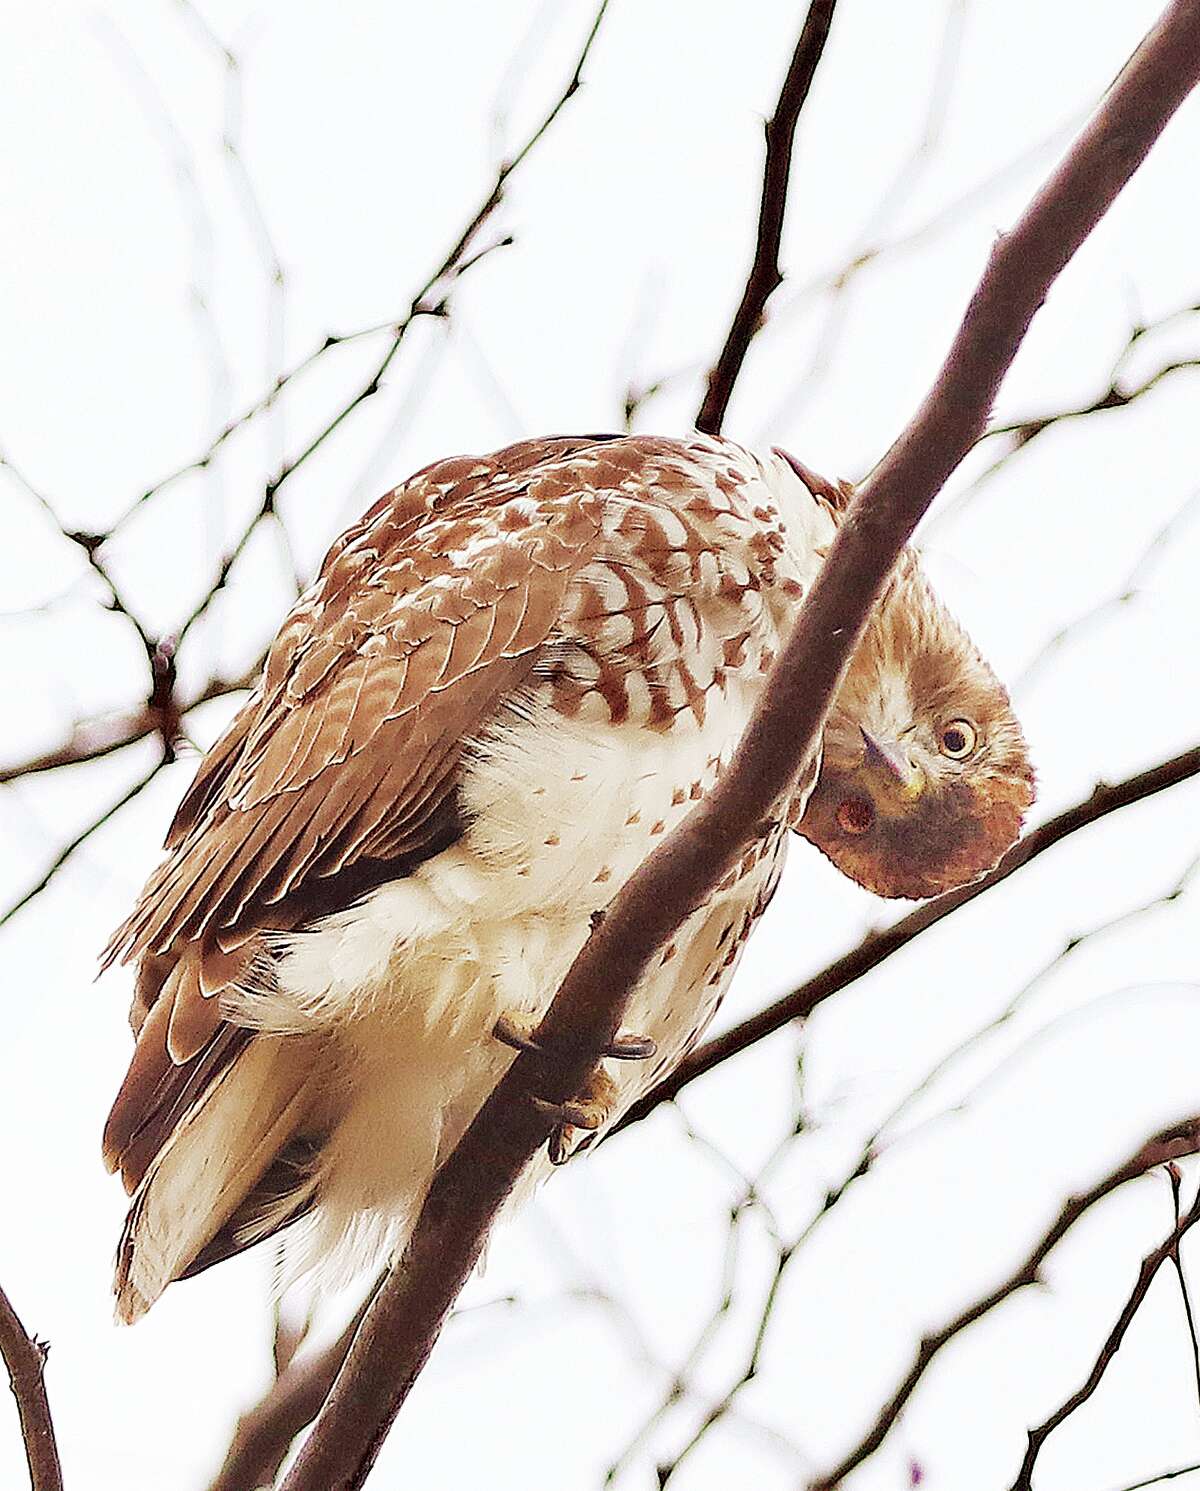 John Badman|The Telegraph What appeared to be a red-tailed hawk twisted his head around and down to get a better look at the photographer Thursday on Rock Hill Road in Wood River. The hawk seemed just as curious and interested in the camera as it was about him.